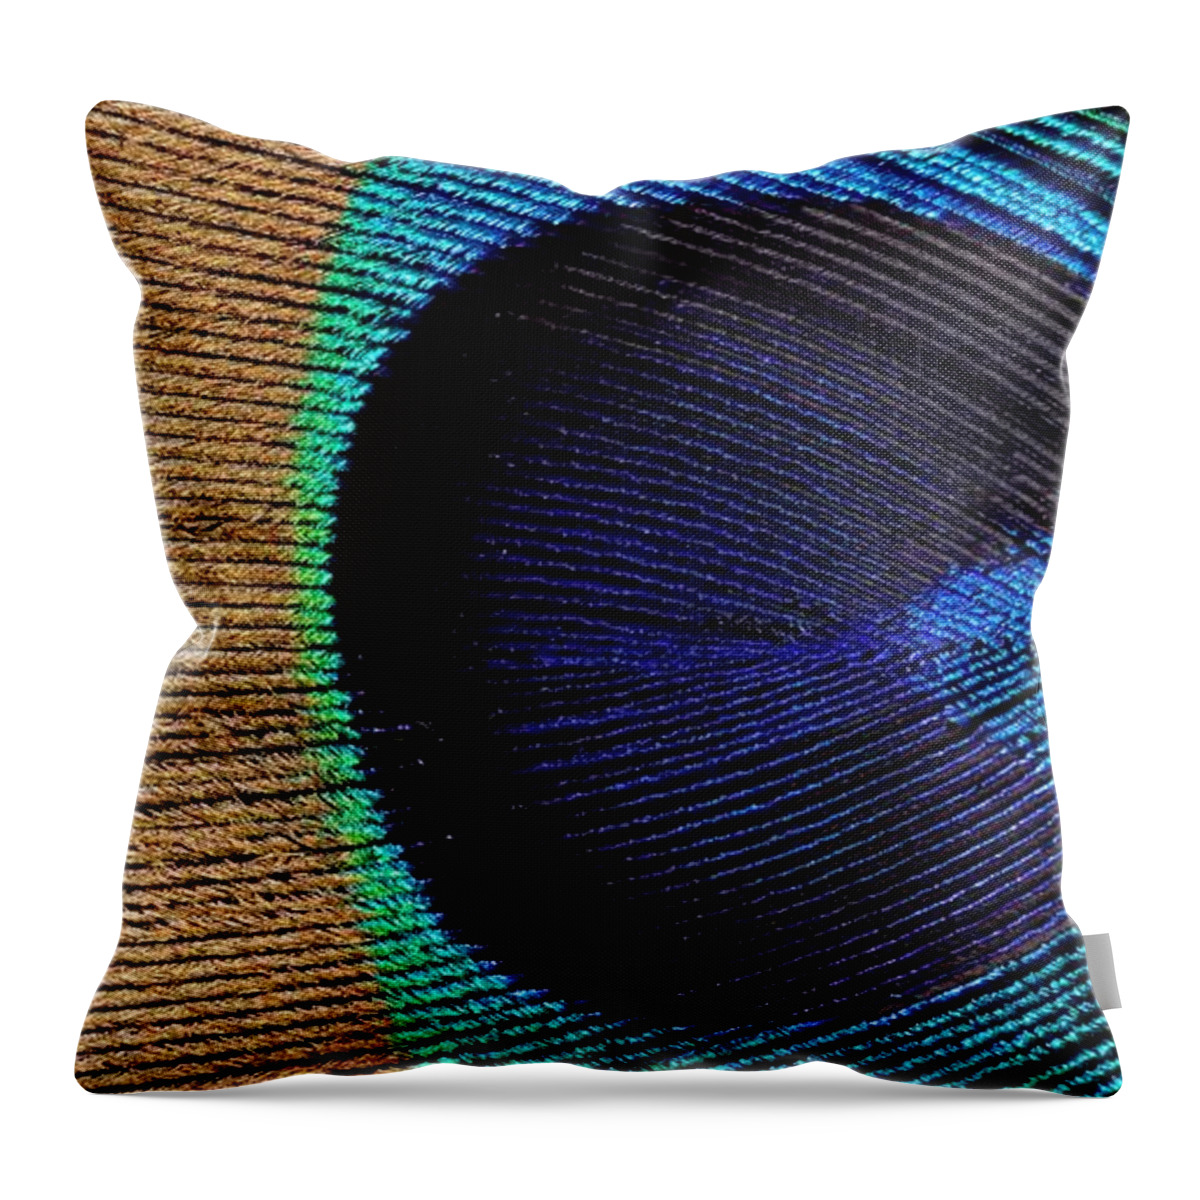 Kj Swan Feathers Throw Pillow featuring the photograph Peacock Weave by KJ Swan